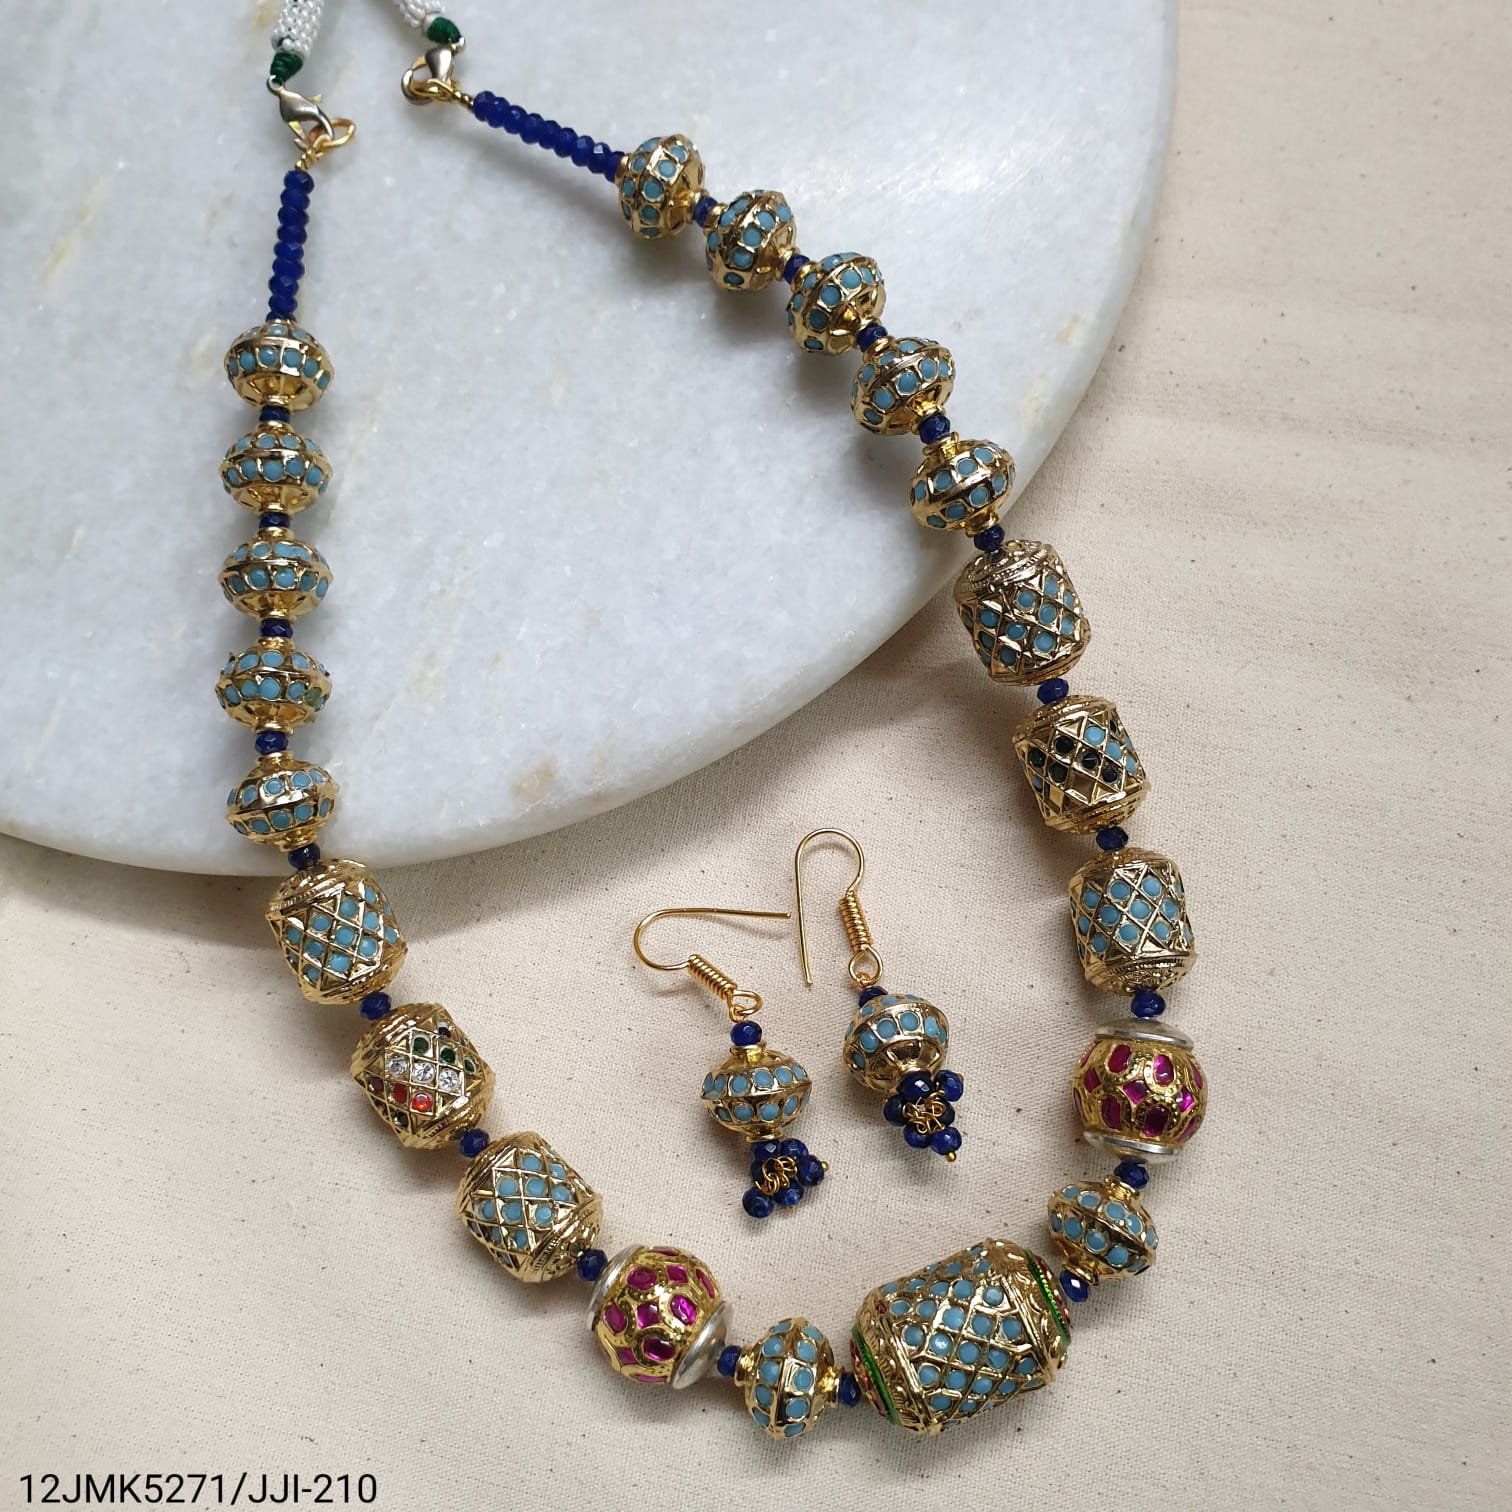 Turquoise Jadau Bead Necklace With Earrings